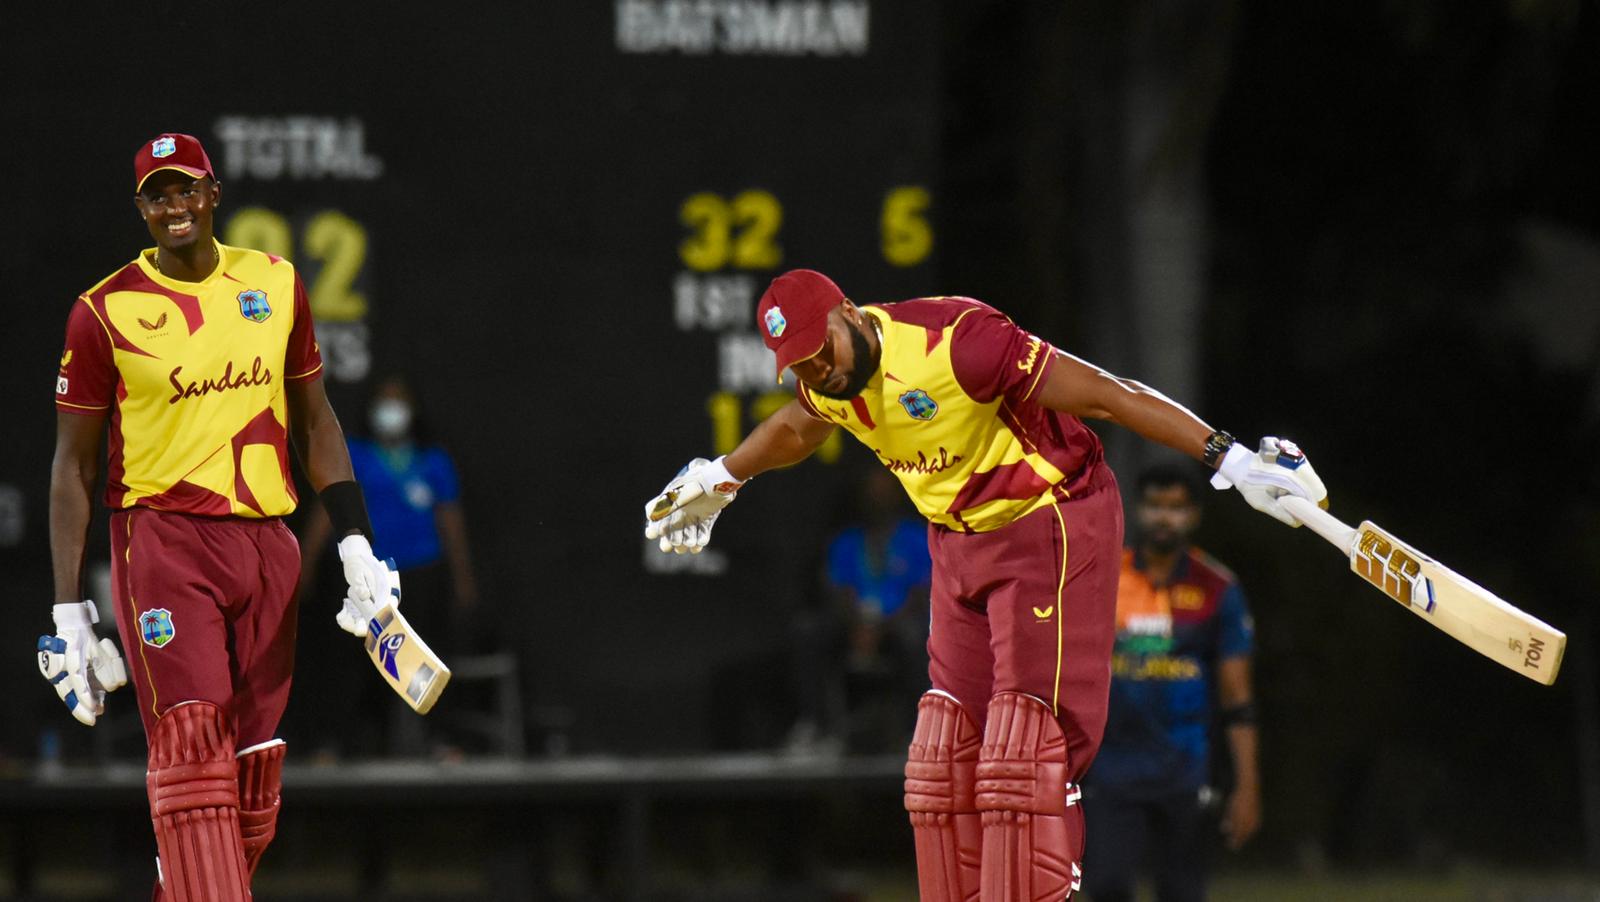 WI vs SL | Getting the opportunity to score six sixes was fantastic, opines Kieron Pollard